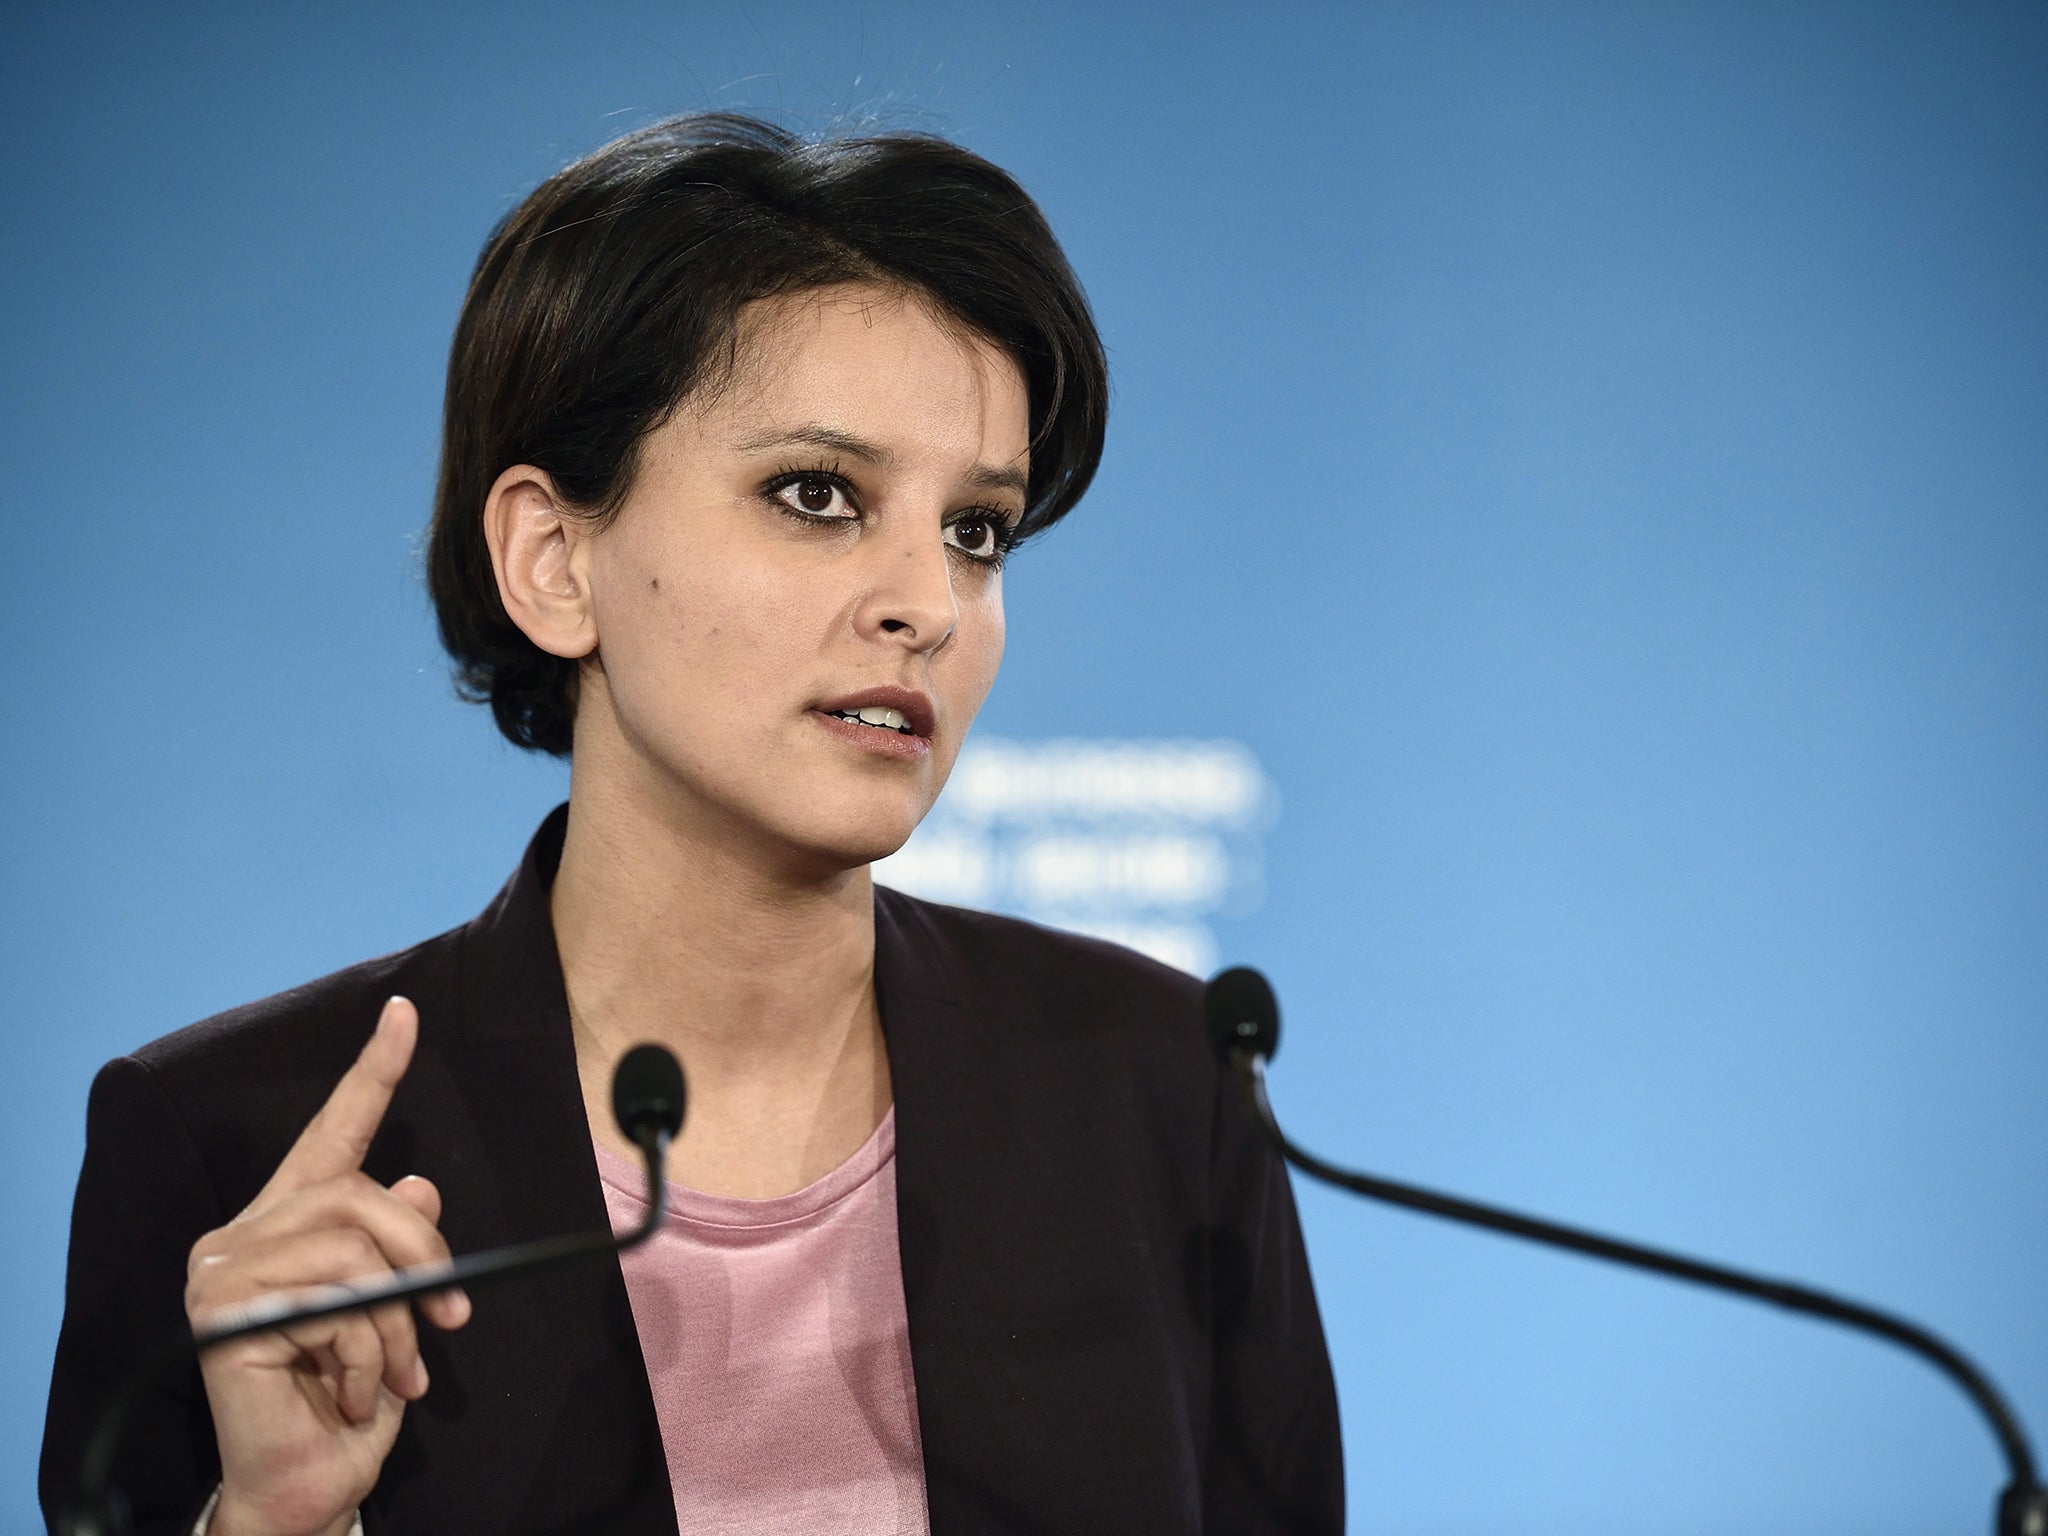 France's education minister Najat Vallaud-Belkacem said the boy’s school had reacted “entirely correctly”